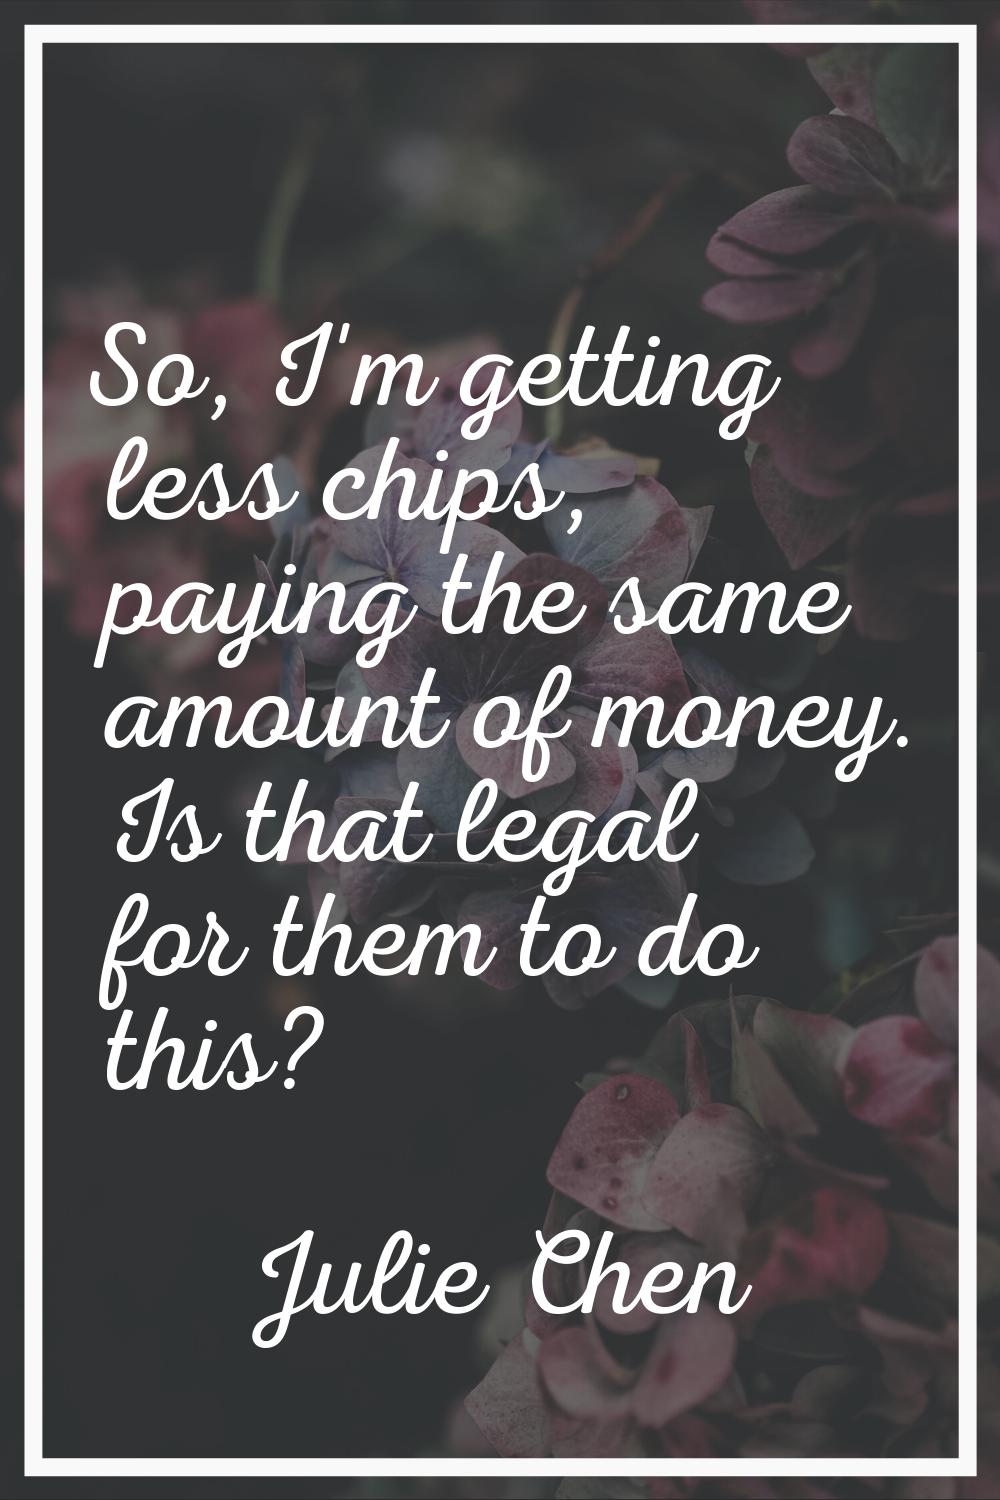 So, I'm getting less chips, paying the same amount of money. Is that legal for them to do this?